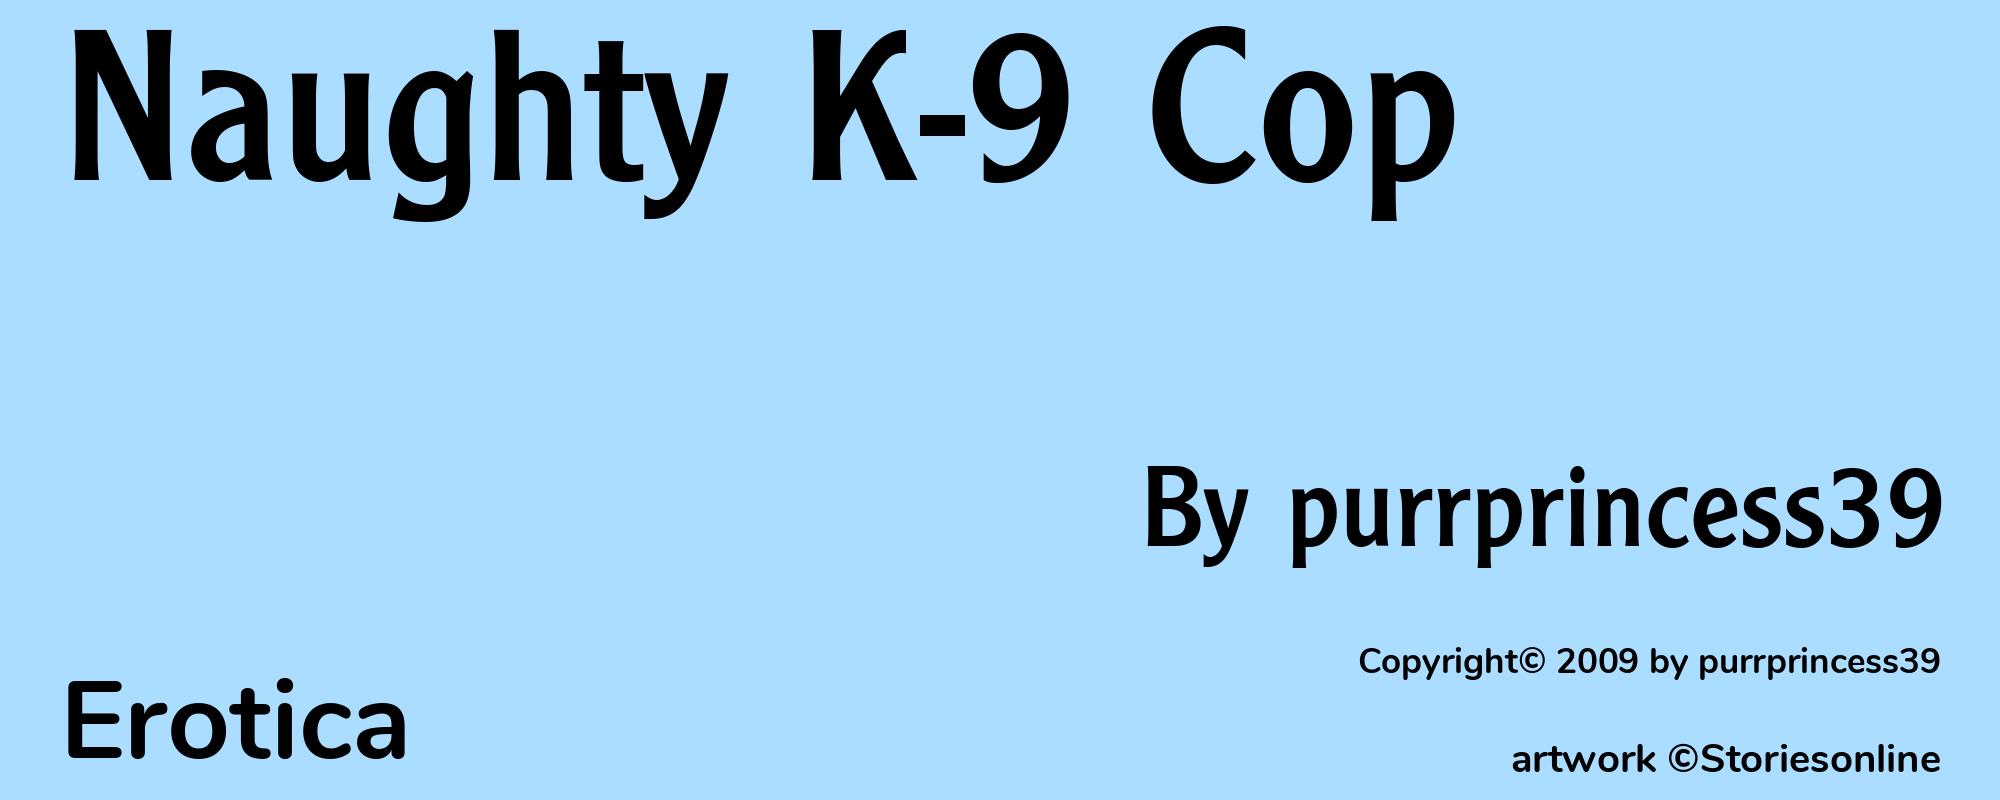 Naughty K-9 Cop - Cover